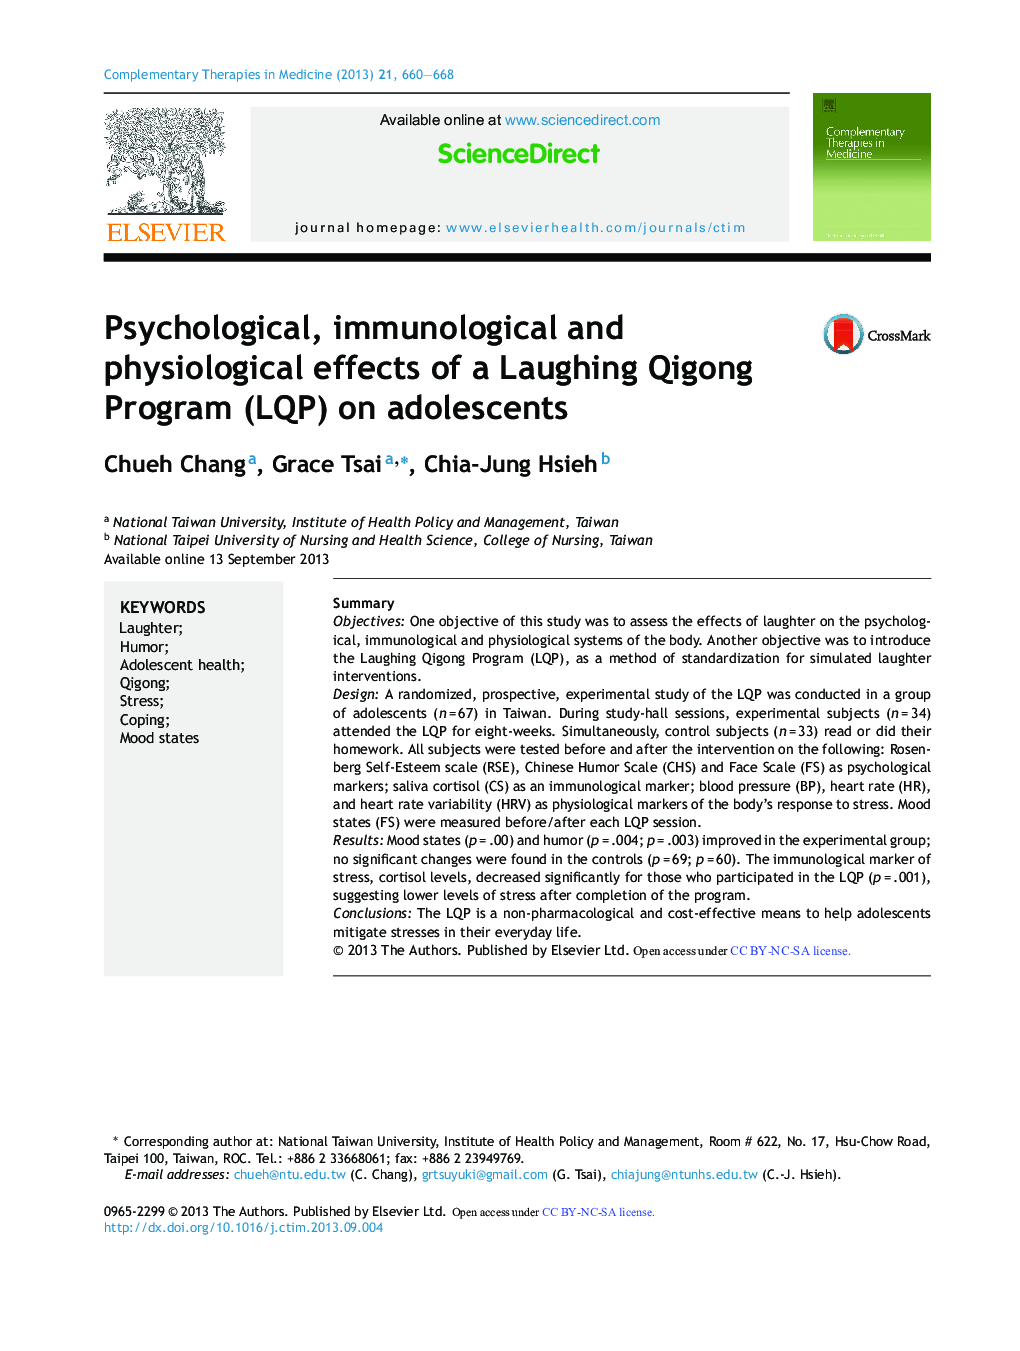 Psychological, immunological and physiological effects of a Laughing Qigong Program (LQP) on adolescents